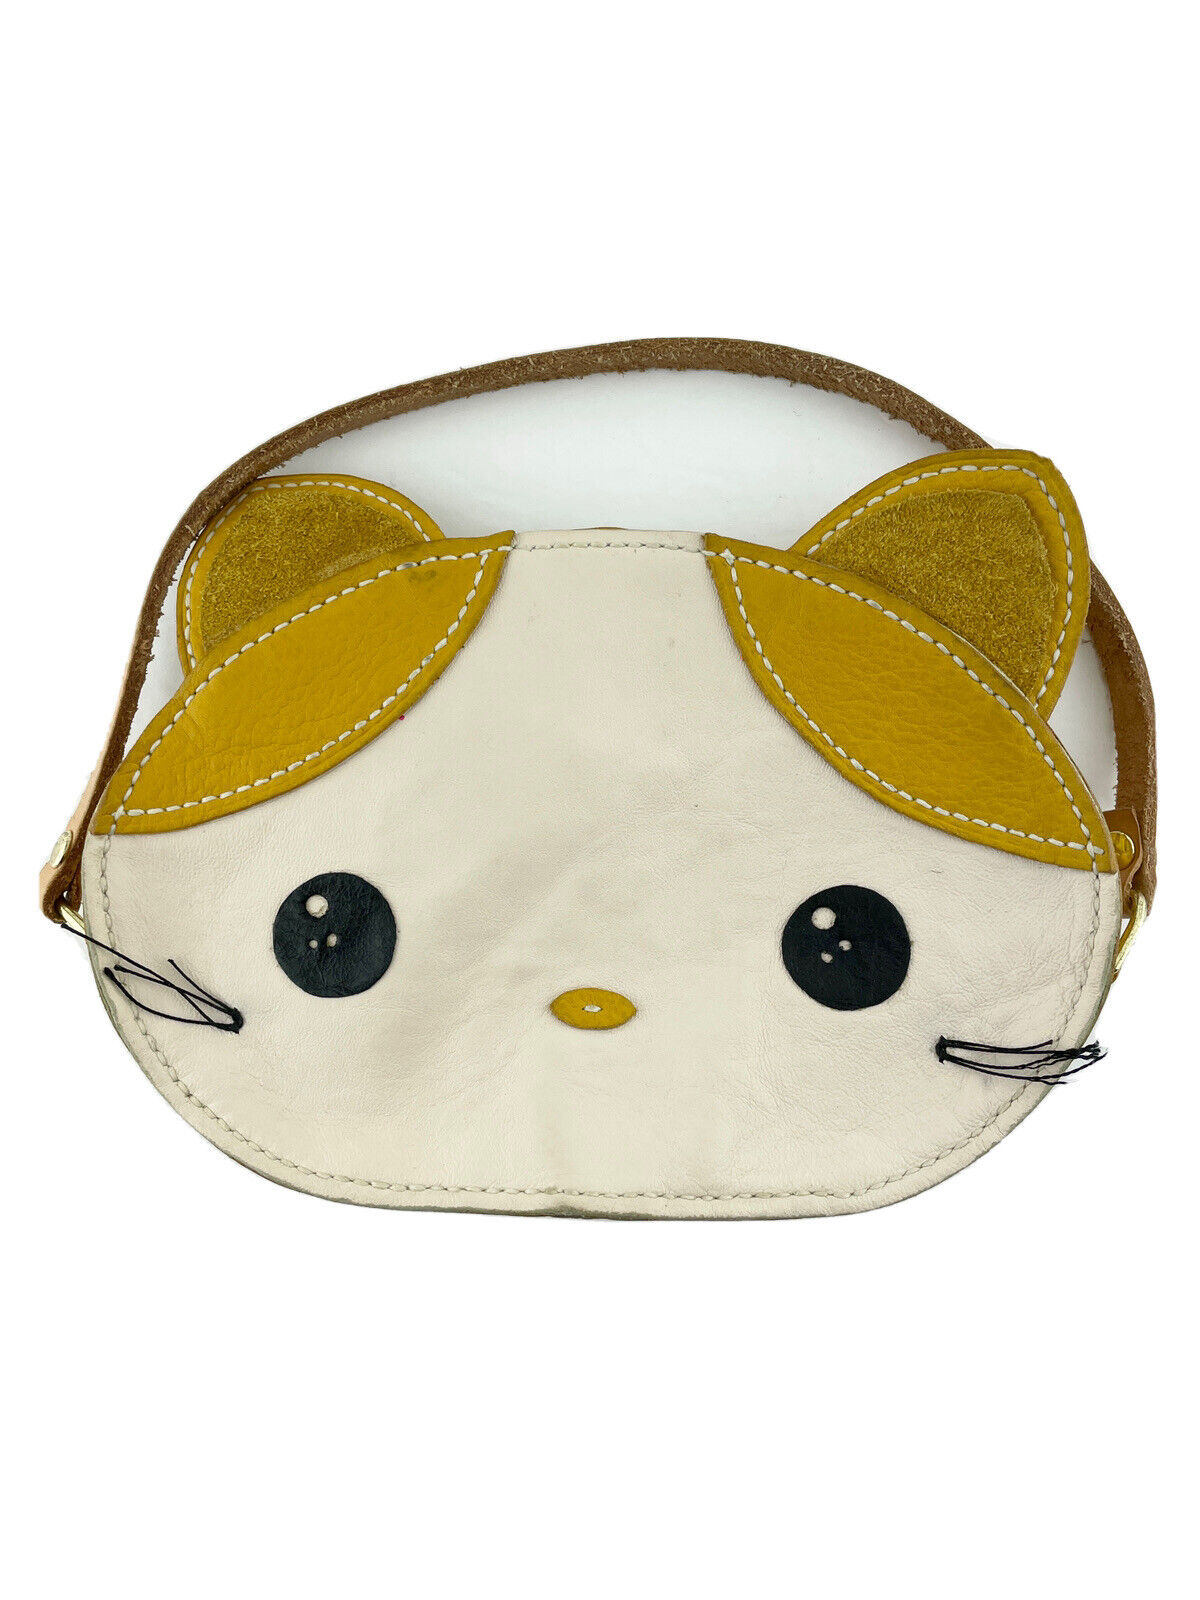 Cute Anime Kitty Cat Face Shaped Purse Cream With Yellow Ears And Nose Cos-play